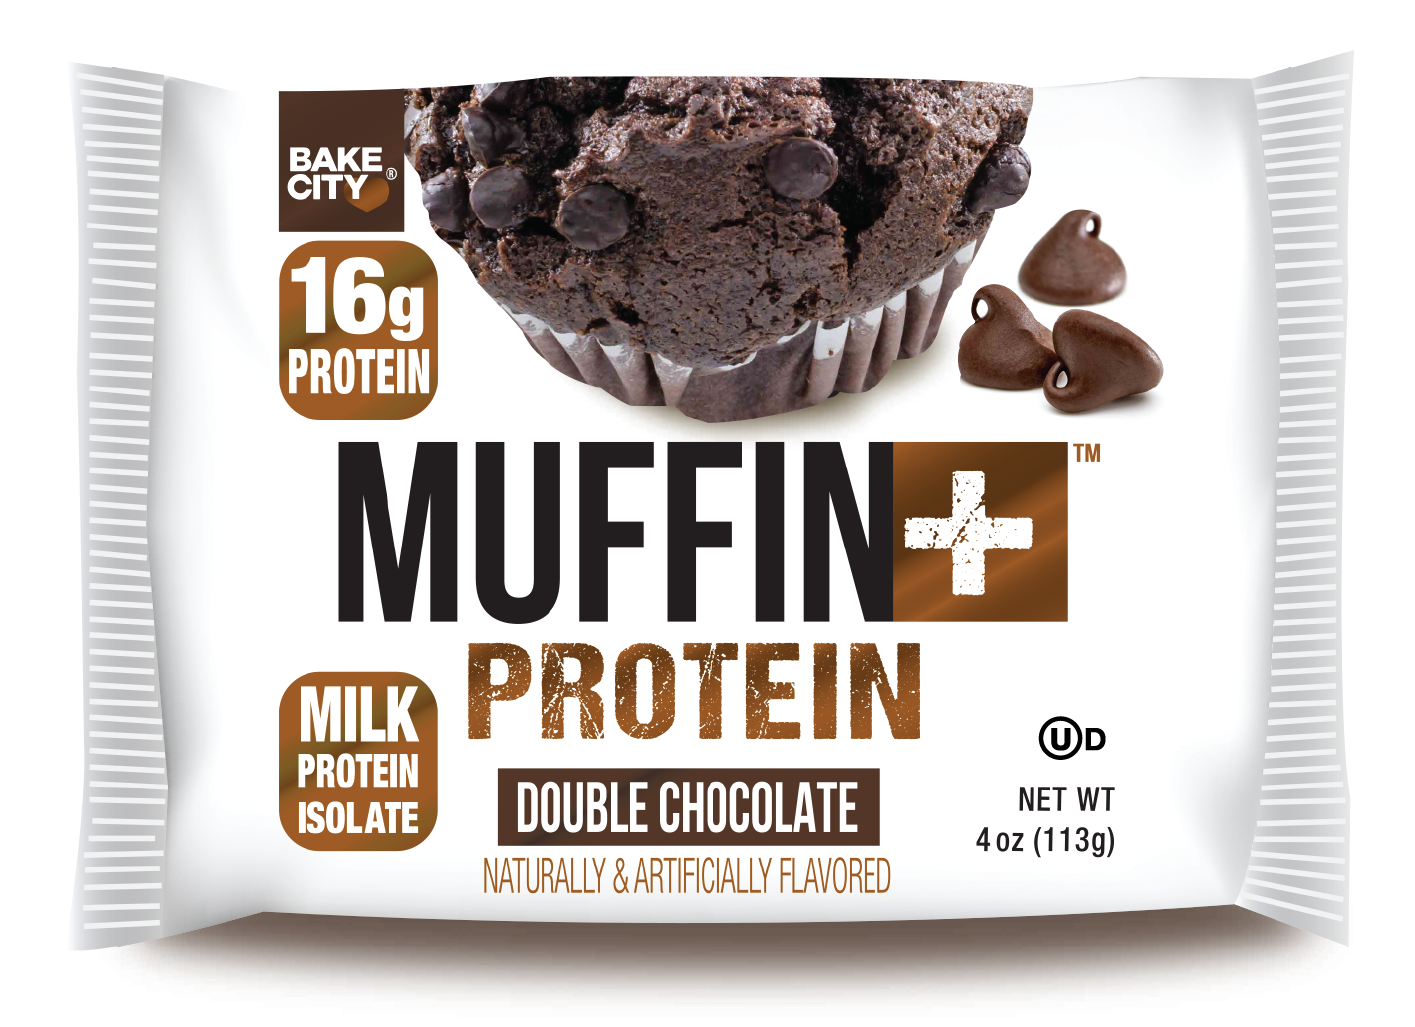 Muffin+ Protein Double Chocolate - Cookie+ Protein